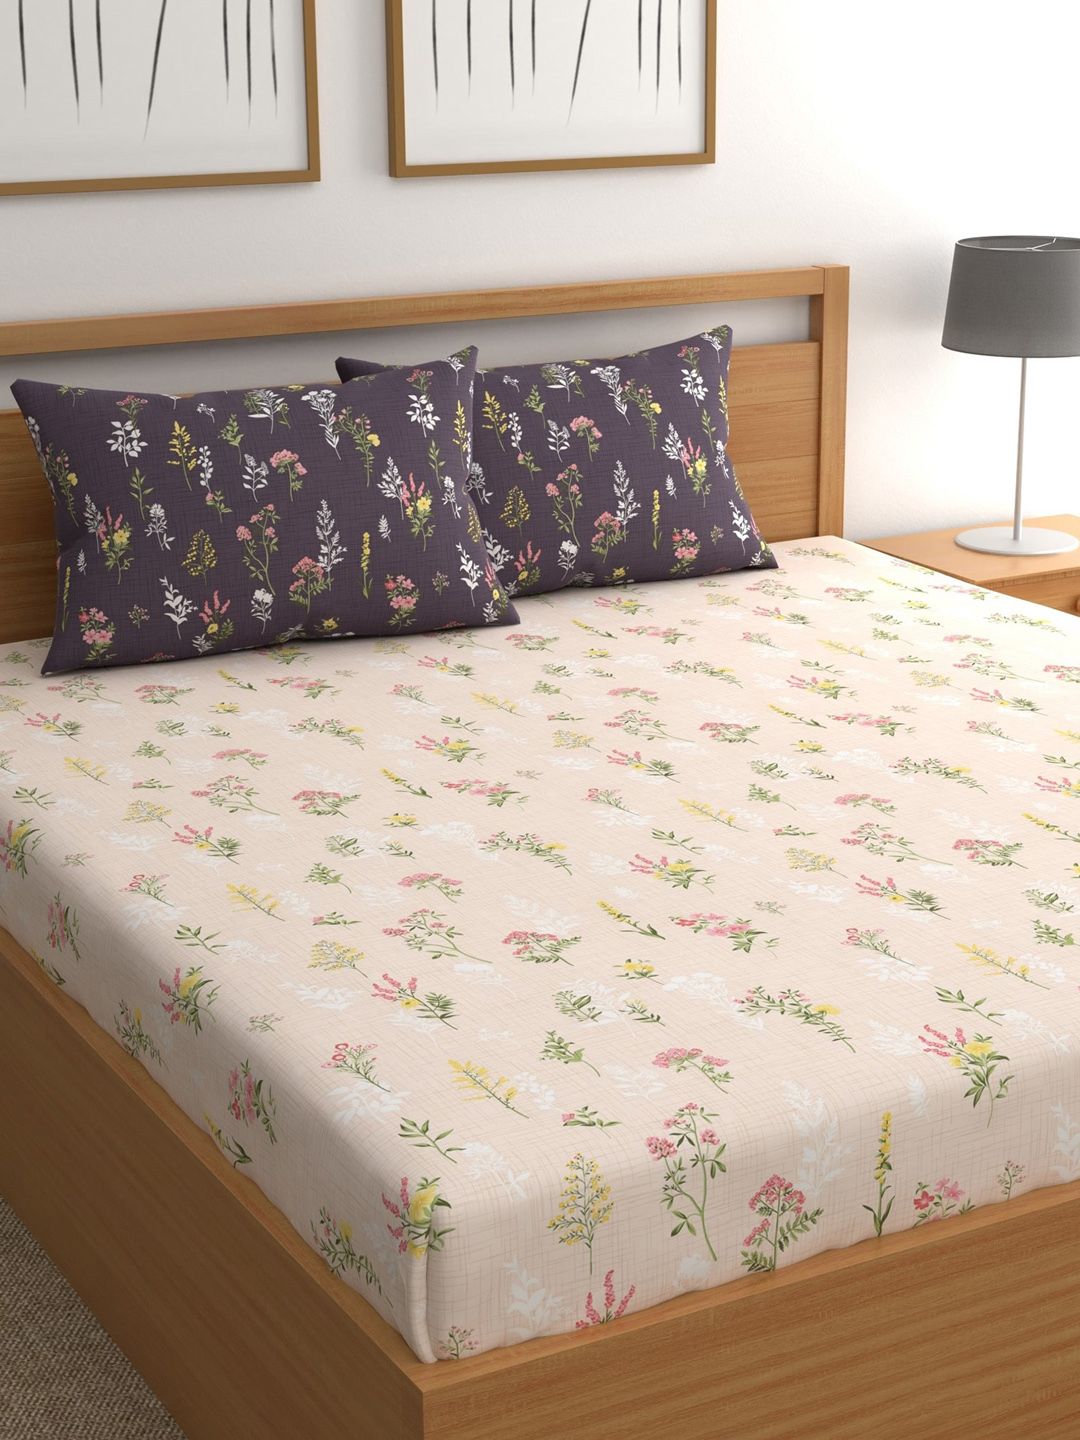 CHHAVI INDIA Peach-Coloured & Grey Floral 210 TC Queen Bedsheet with 2 Pillow Covers Price in India